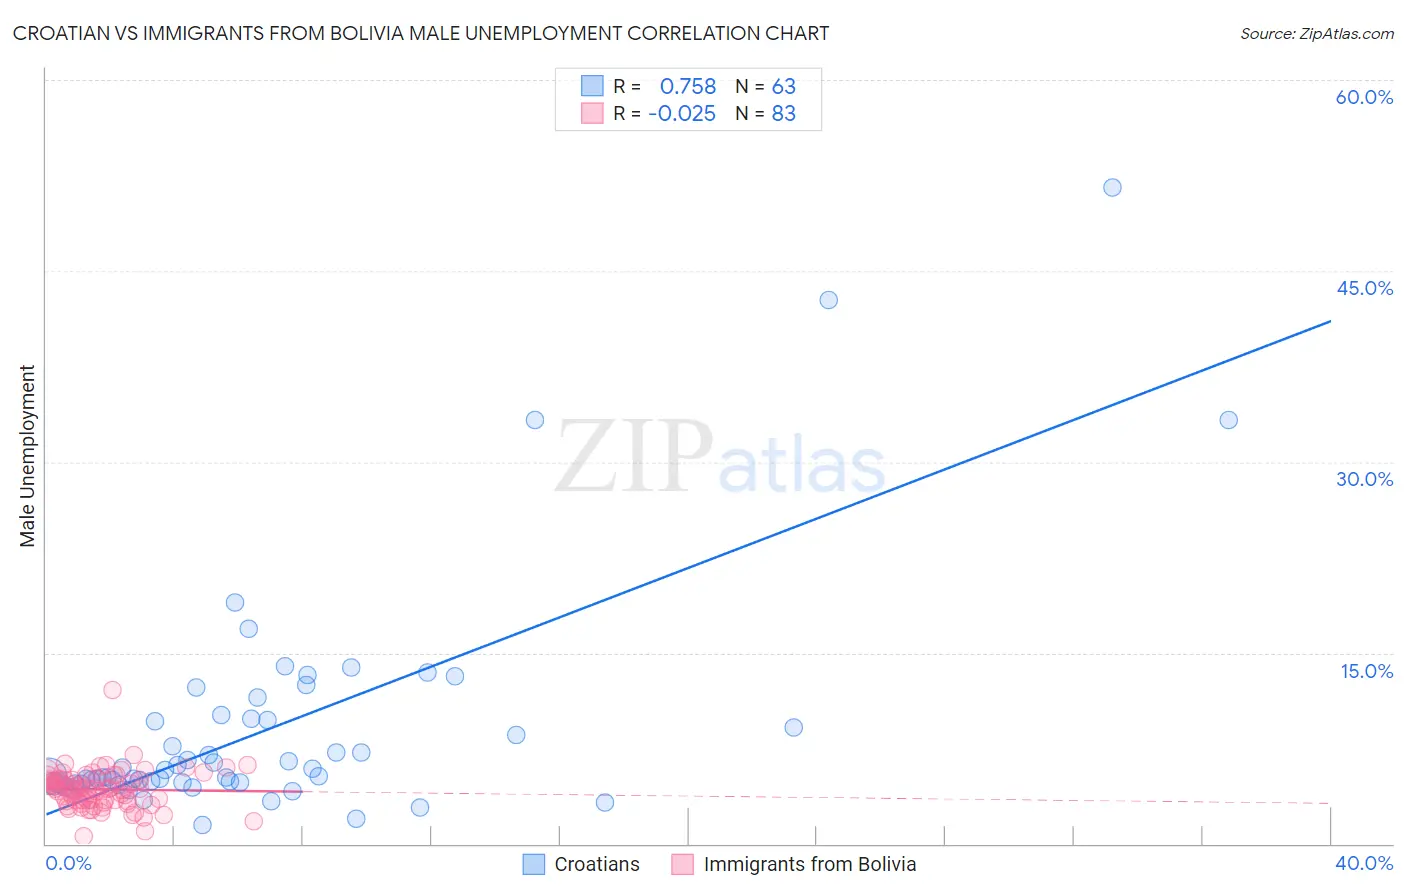 Croatian vs Immigrants from Bolivia Male Unemployment